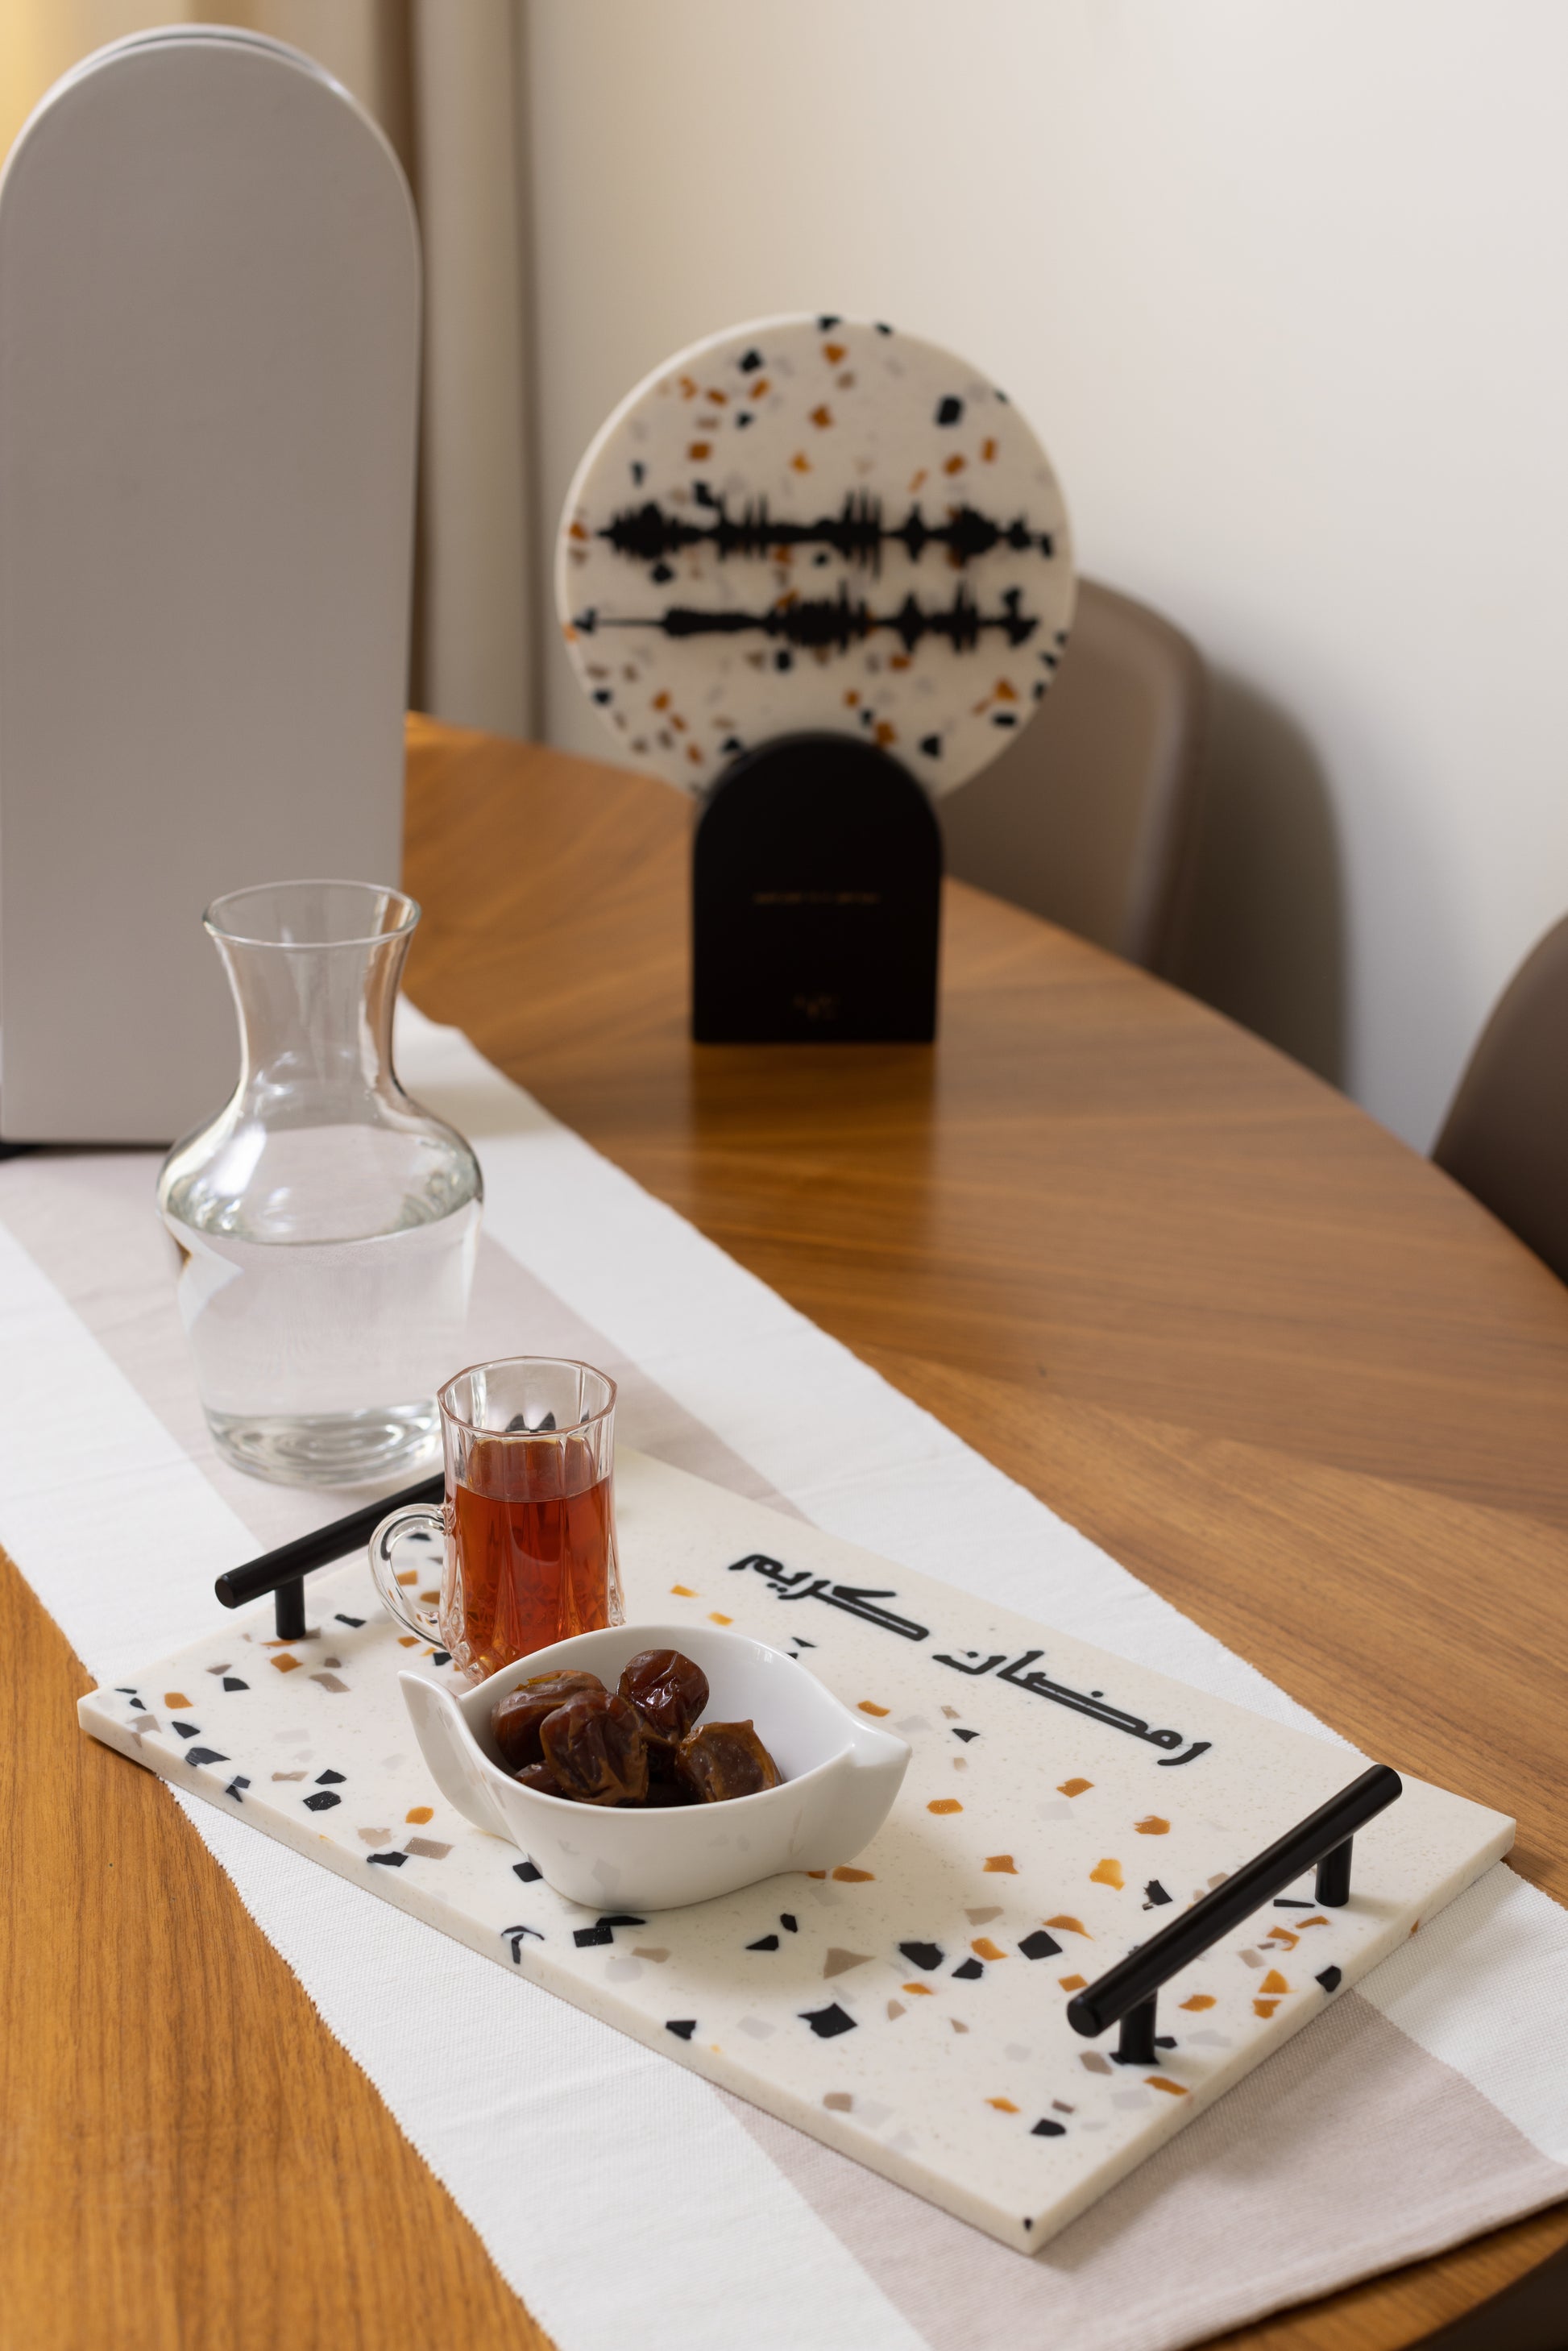 Small coffee and tea tray from terrazzo and black handles